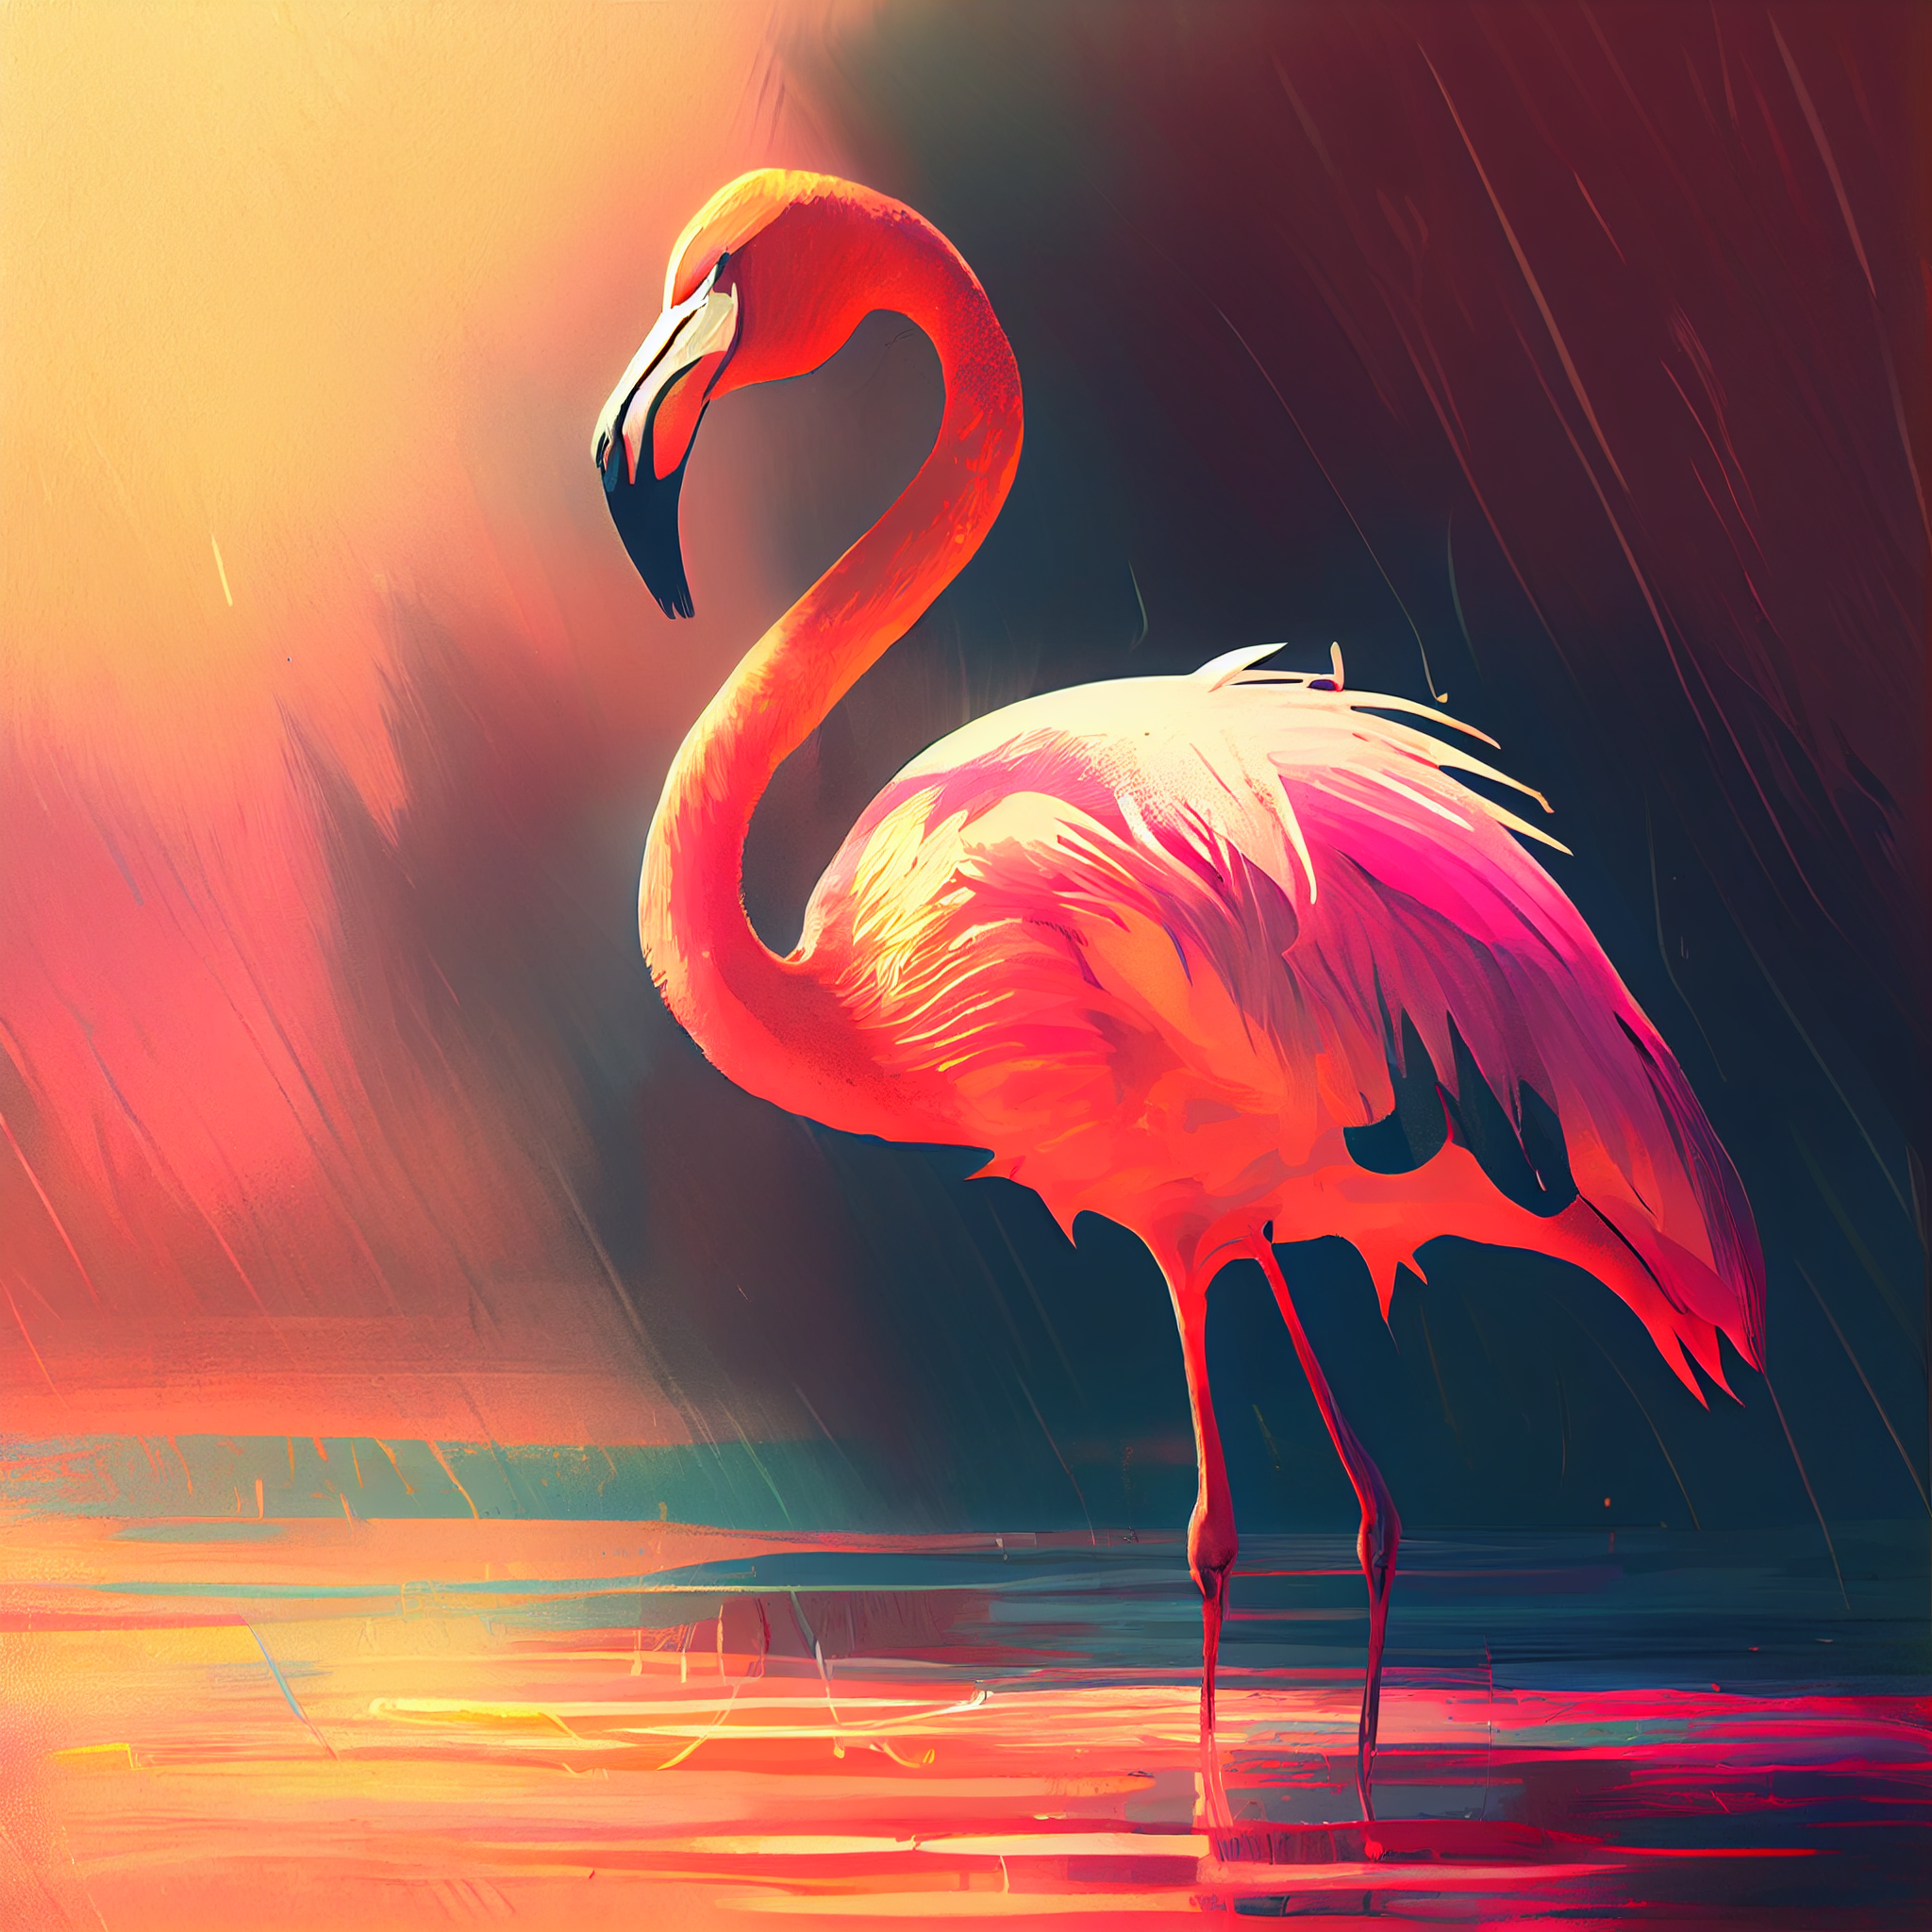 Radiant Flamingo by the Water: A Captivating Acrylic Color Print with Sunbeams